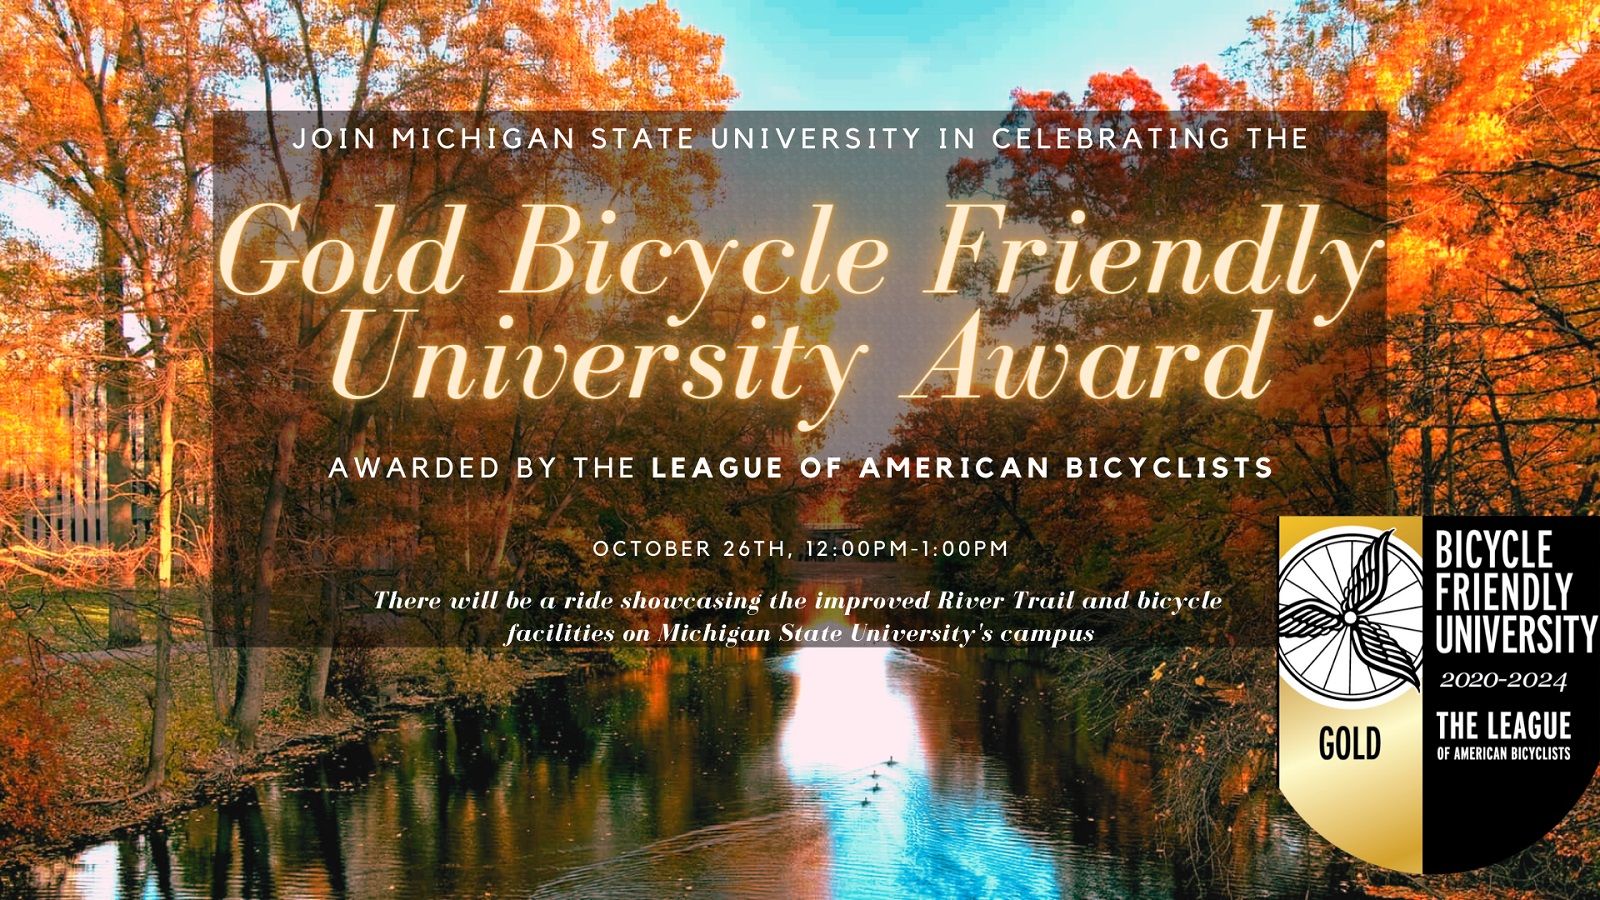 MSU Gold Bicycle Friendly University Celebration. October 26, 2021 from 12-1 pm.